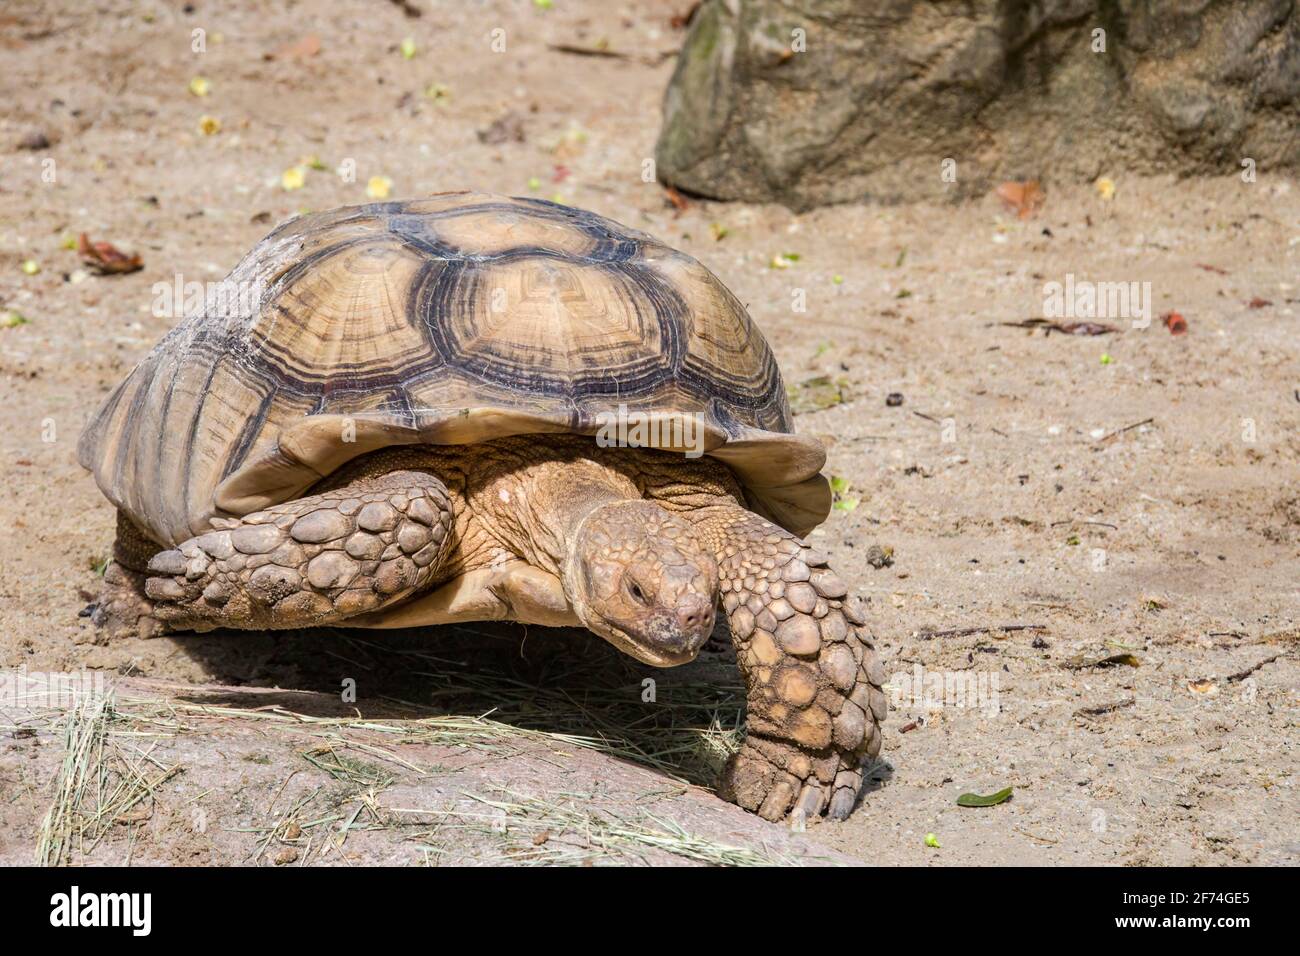 The African spurred tortoise (Centrochelys sulcata) is a species of tortoise, which inhabits the southern edge of the Sahara desert in Africa. Stock Photo